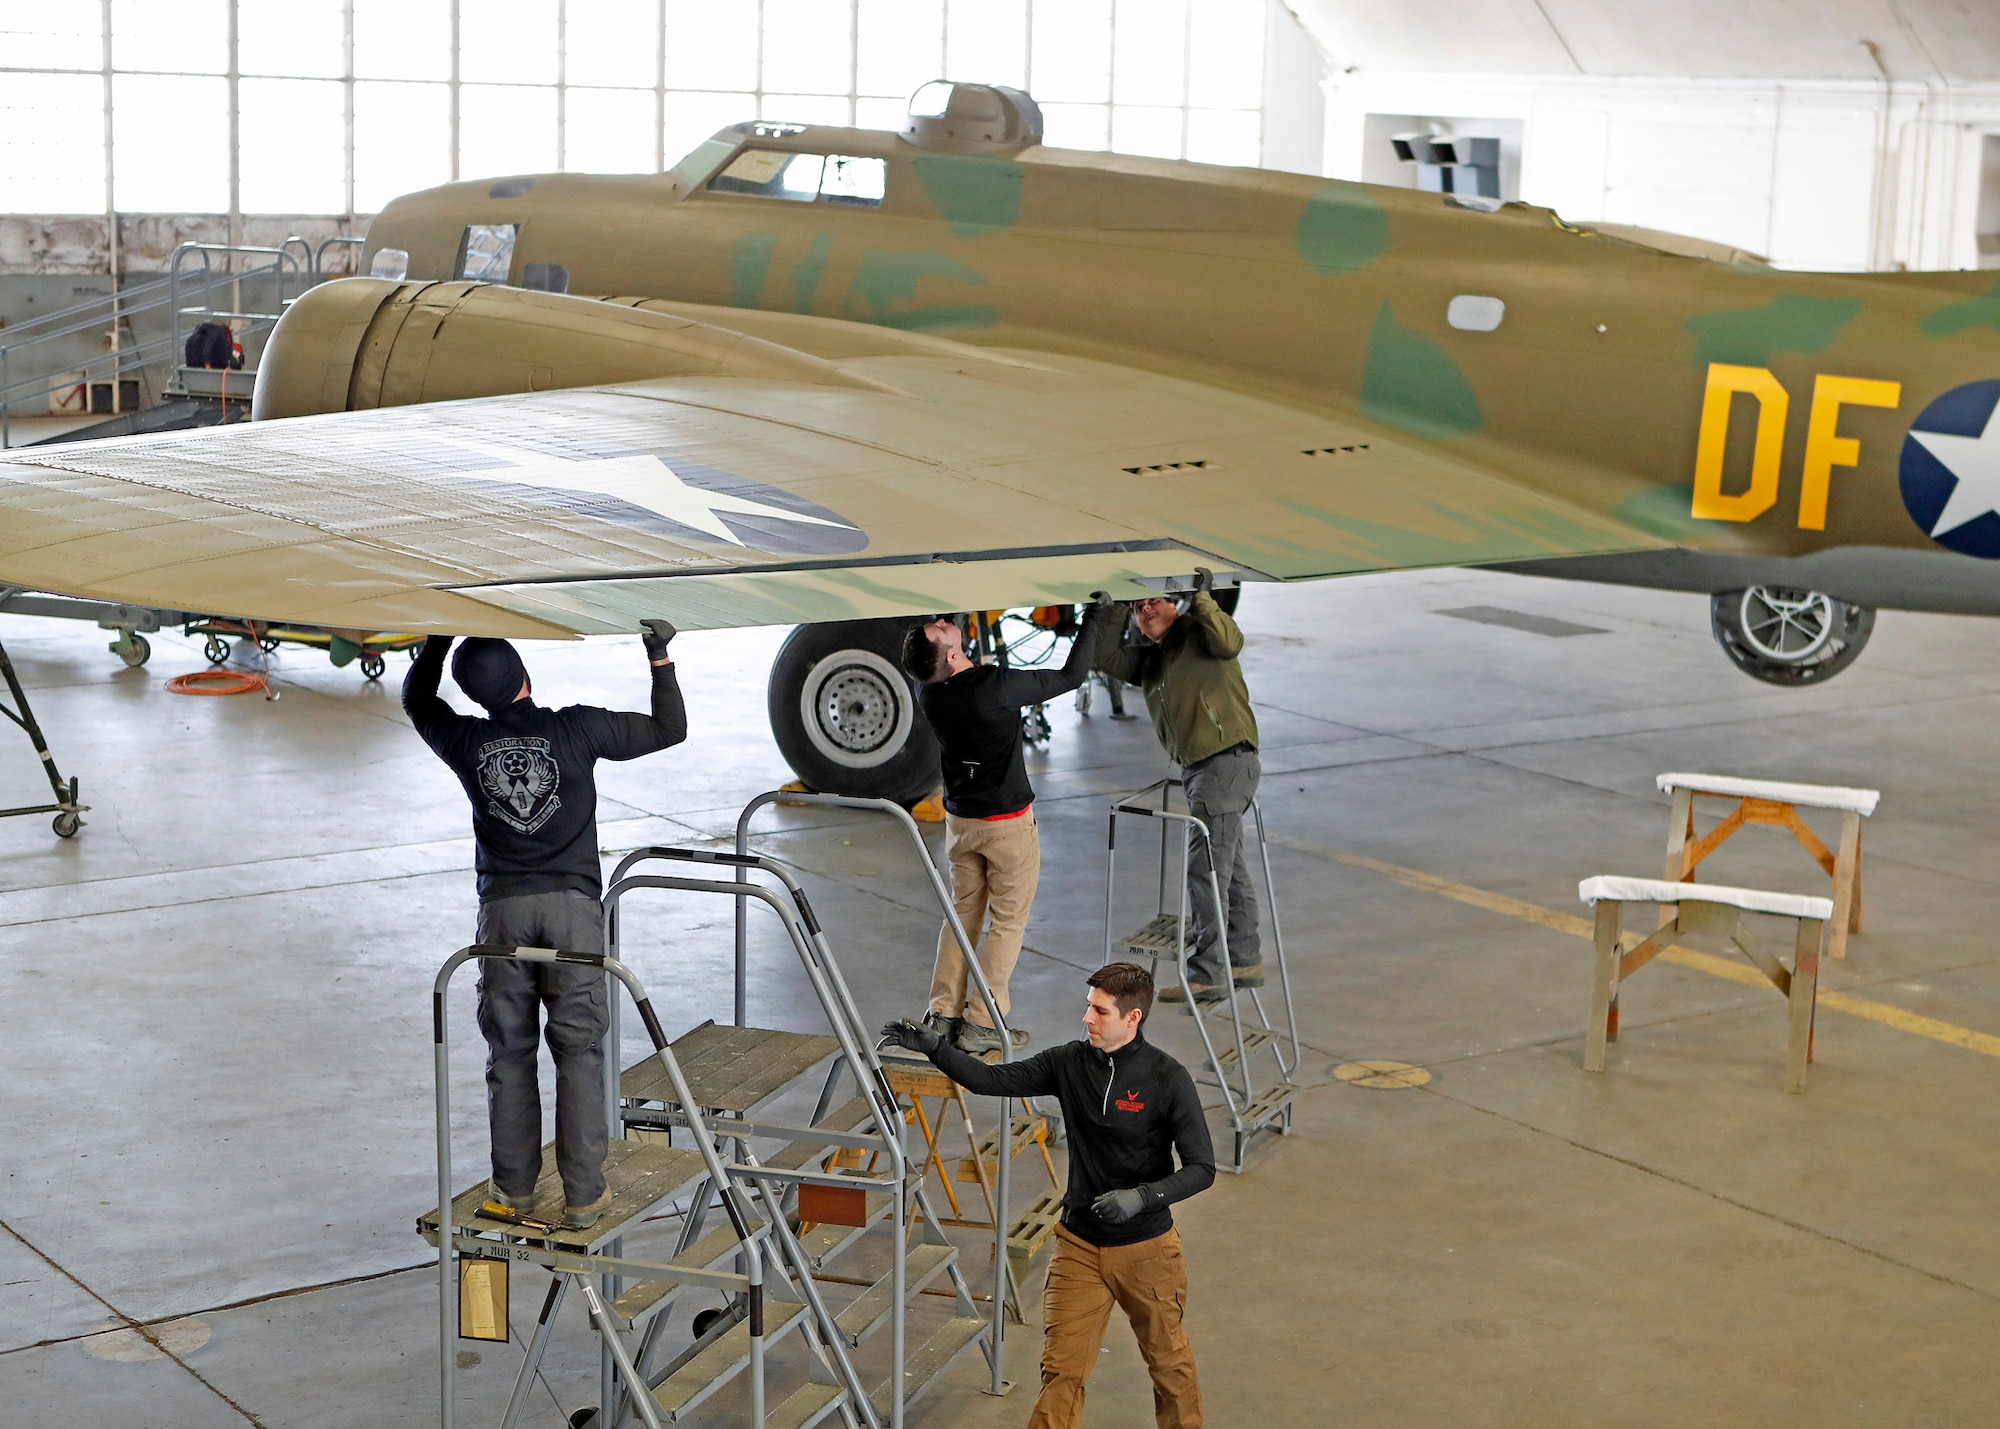 DAYTON, Ohio (01/04/2018) -- National Museum of the U.S. Air Force restoration crews installing the final control surfaces on the Boeing B-17F Memphis Belle™. Plans call for the aircraft to be placed on permanent public display in the WWII Gallery here at the National Museum of the U.S. Air Force on May 17, 2018. (U.S. Air Force photo by Don Popp)